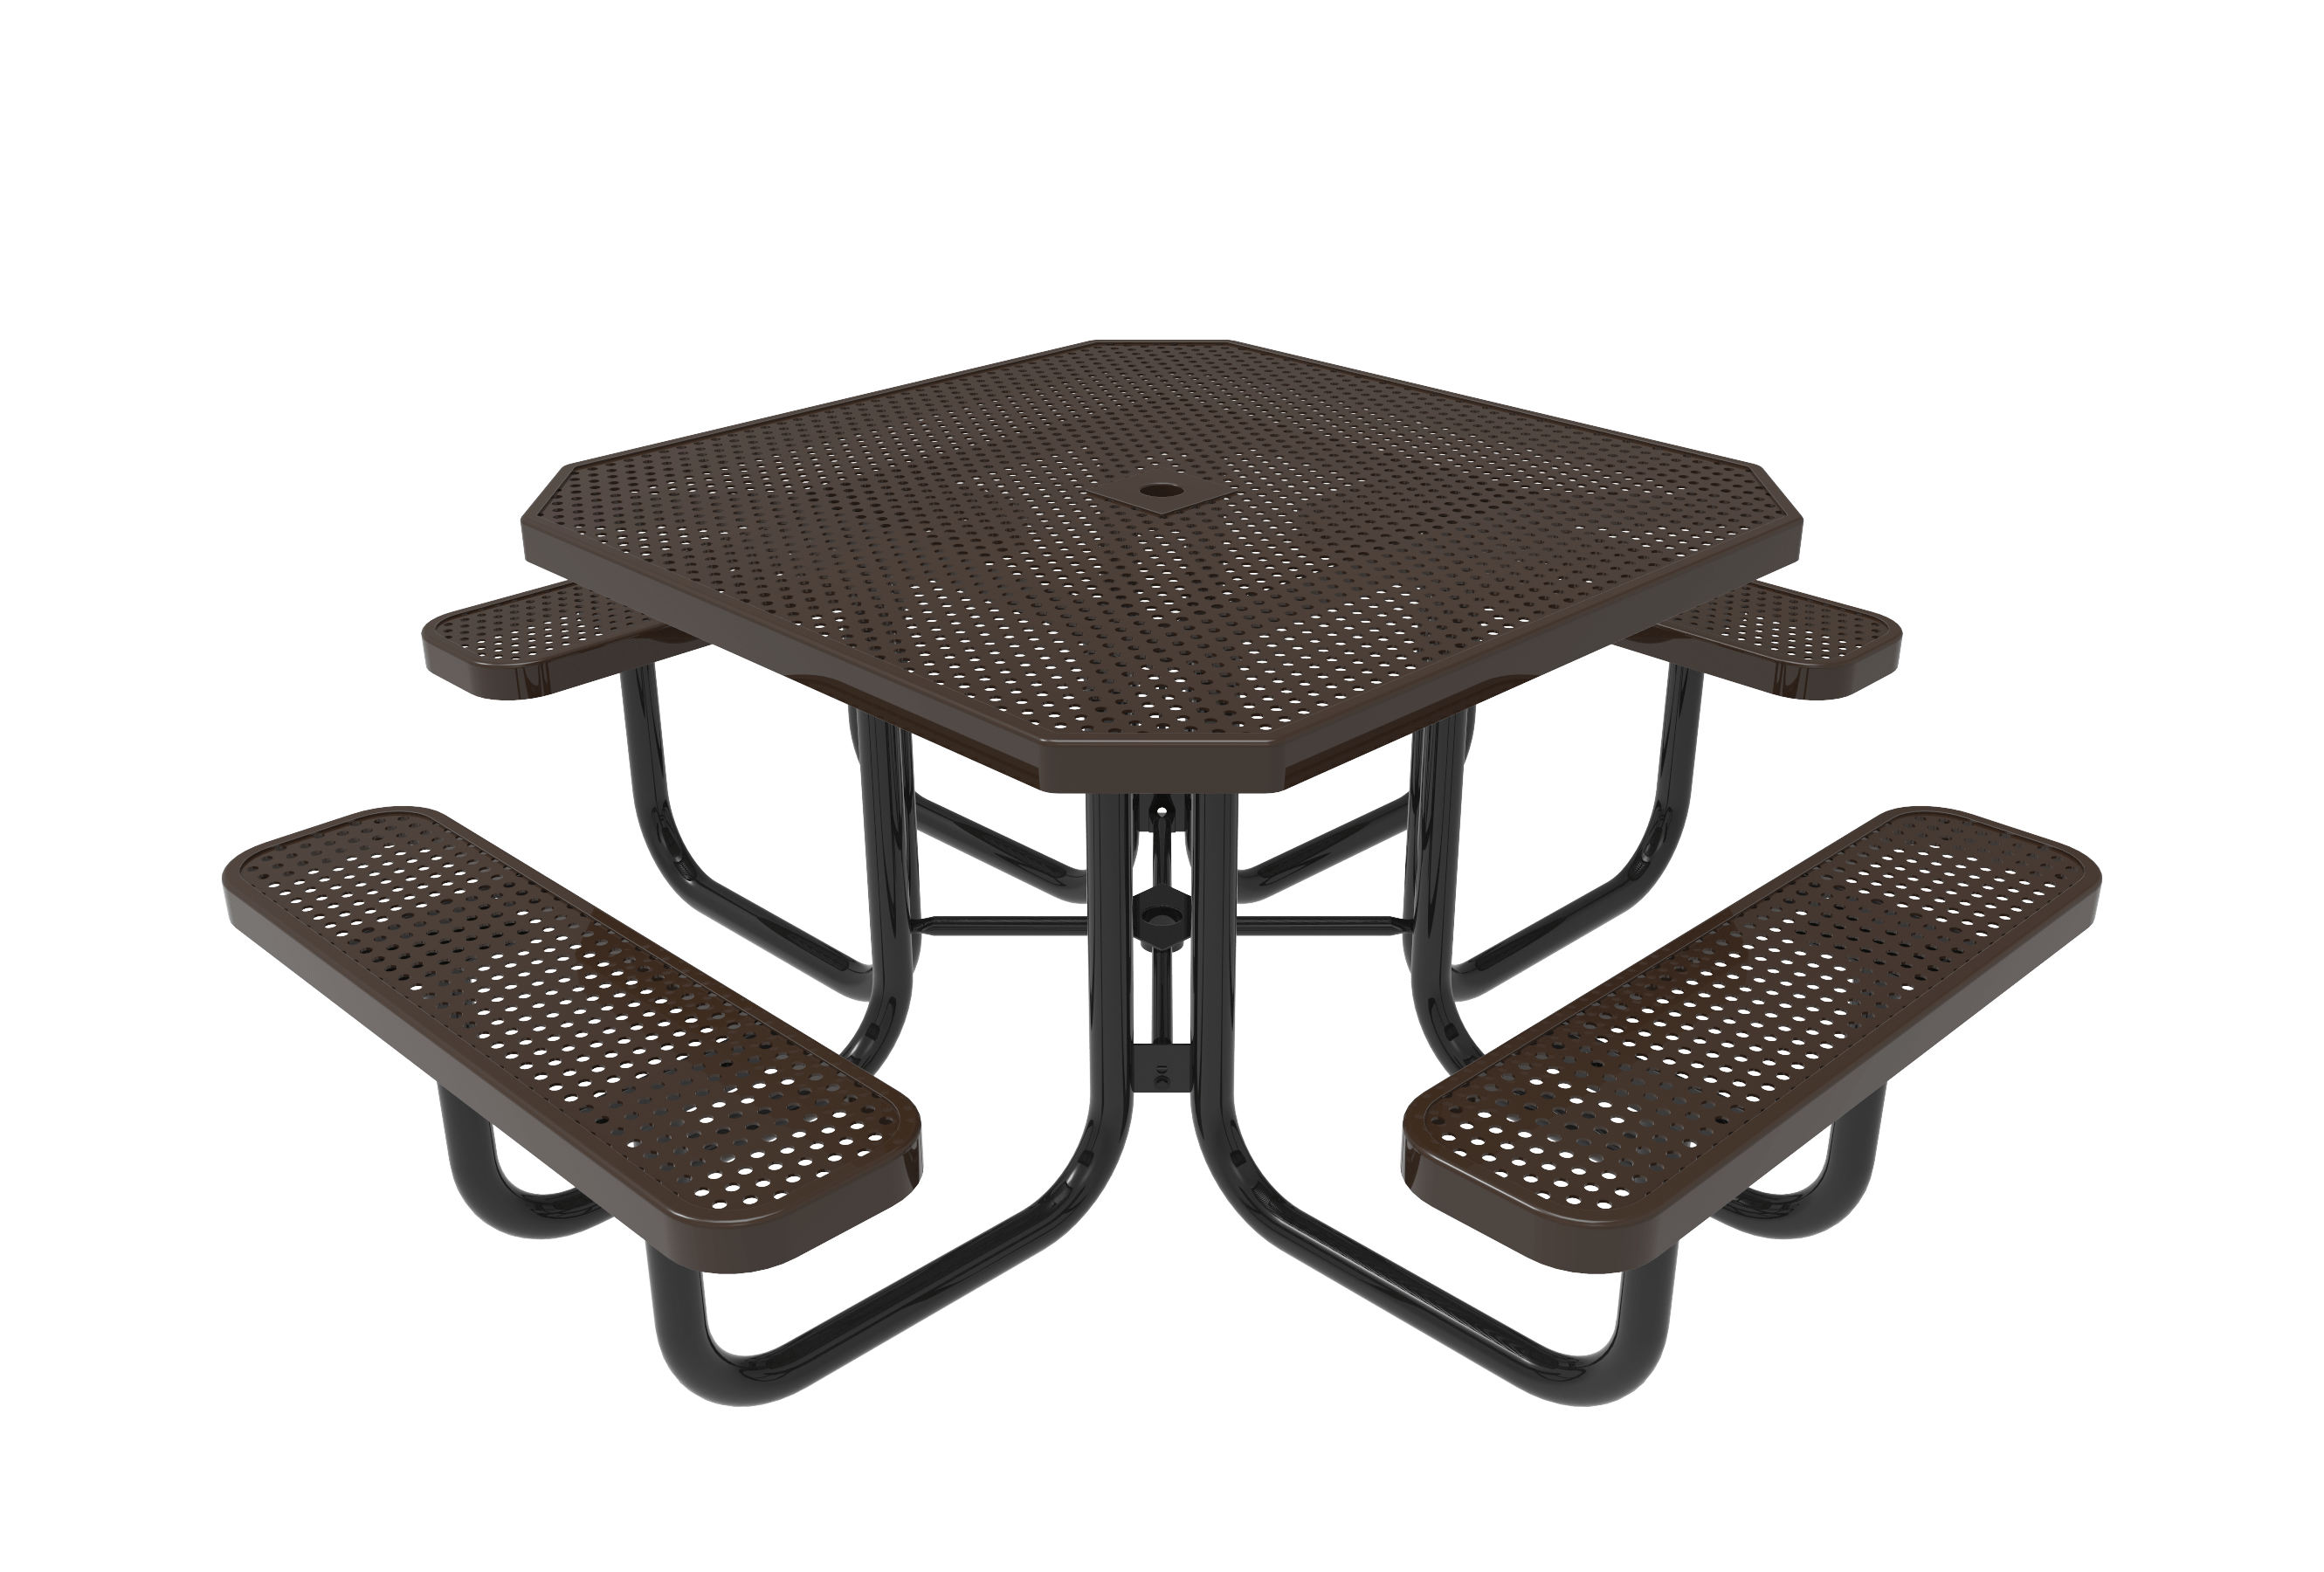 46″ Oct Picnic Table 4 Seat-Punched
TOT46-D-04-000
Industry Standard Finish
$1399.00
TOT46-B-04-000
Advantage Premium Finish
$1699.00
